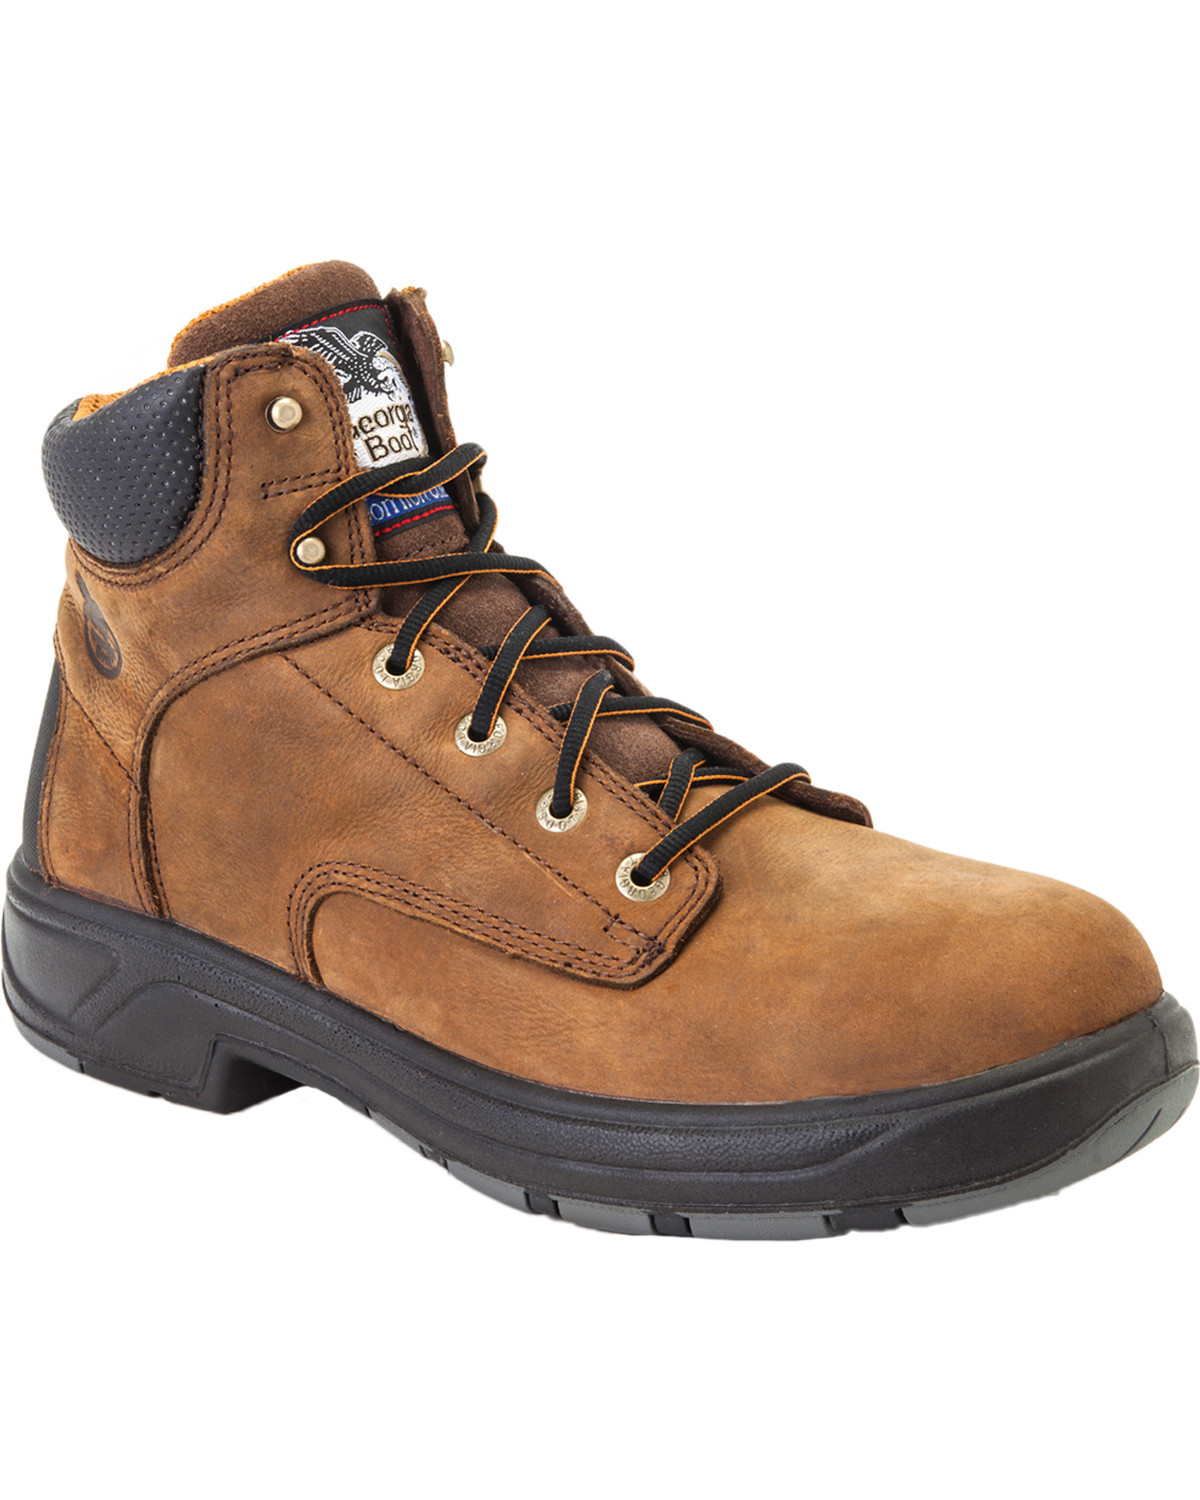 Georgia Men's Lace Up FLXpoint Waterproof Work Boots